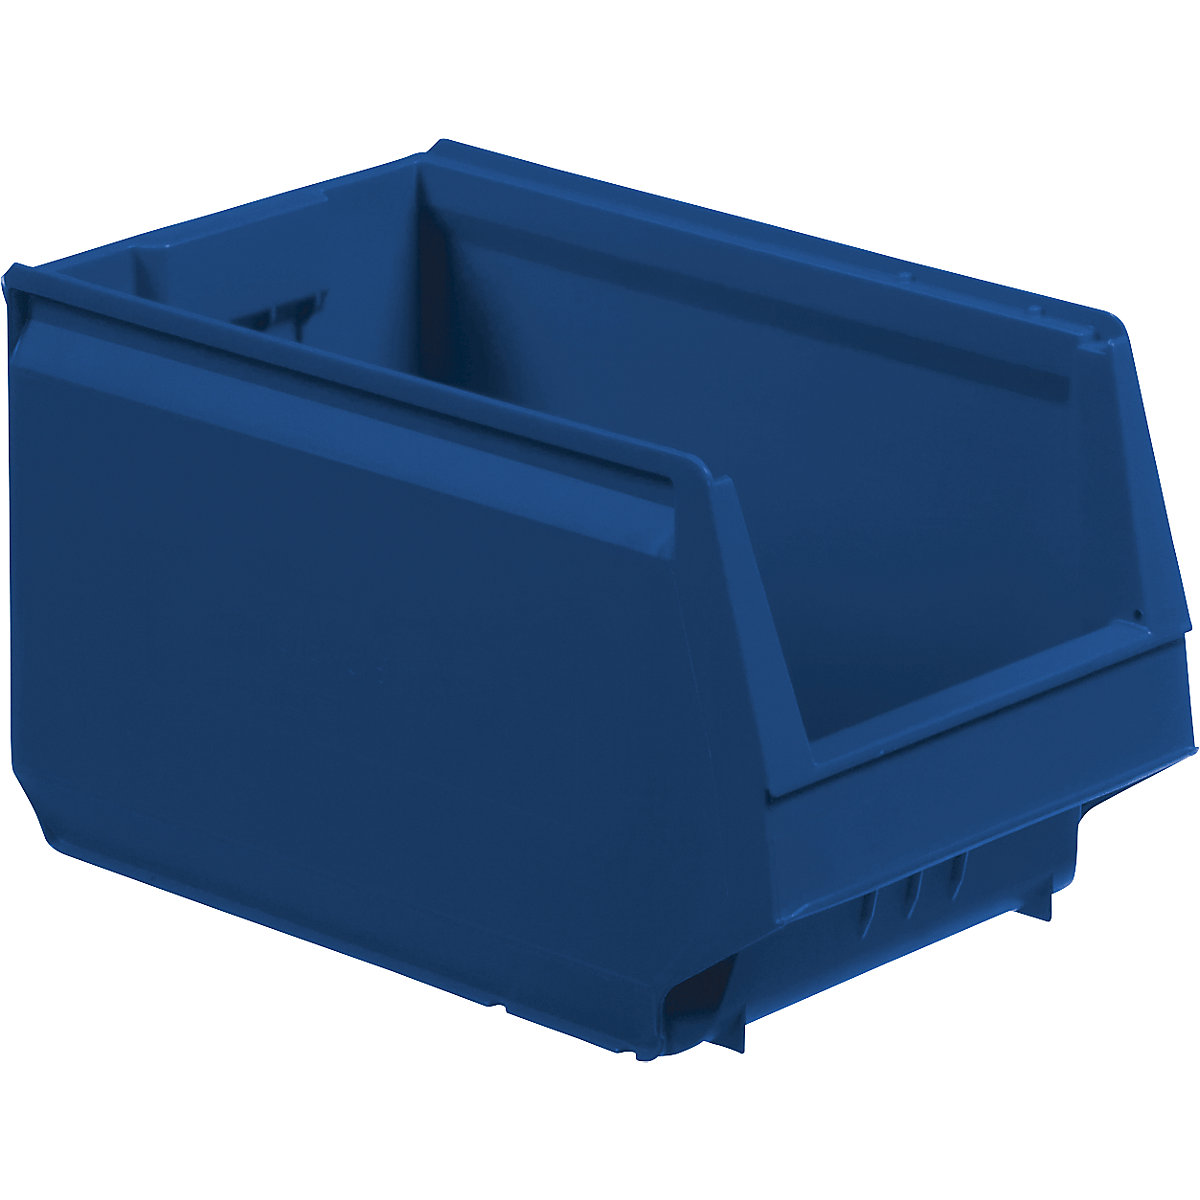 Open fronted storage bin made of polypropylene: LxWxH 350 x 206 